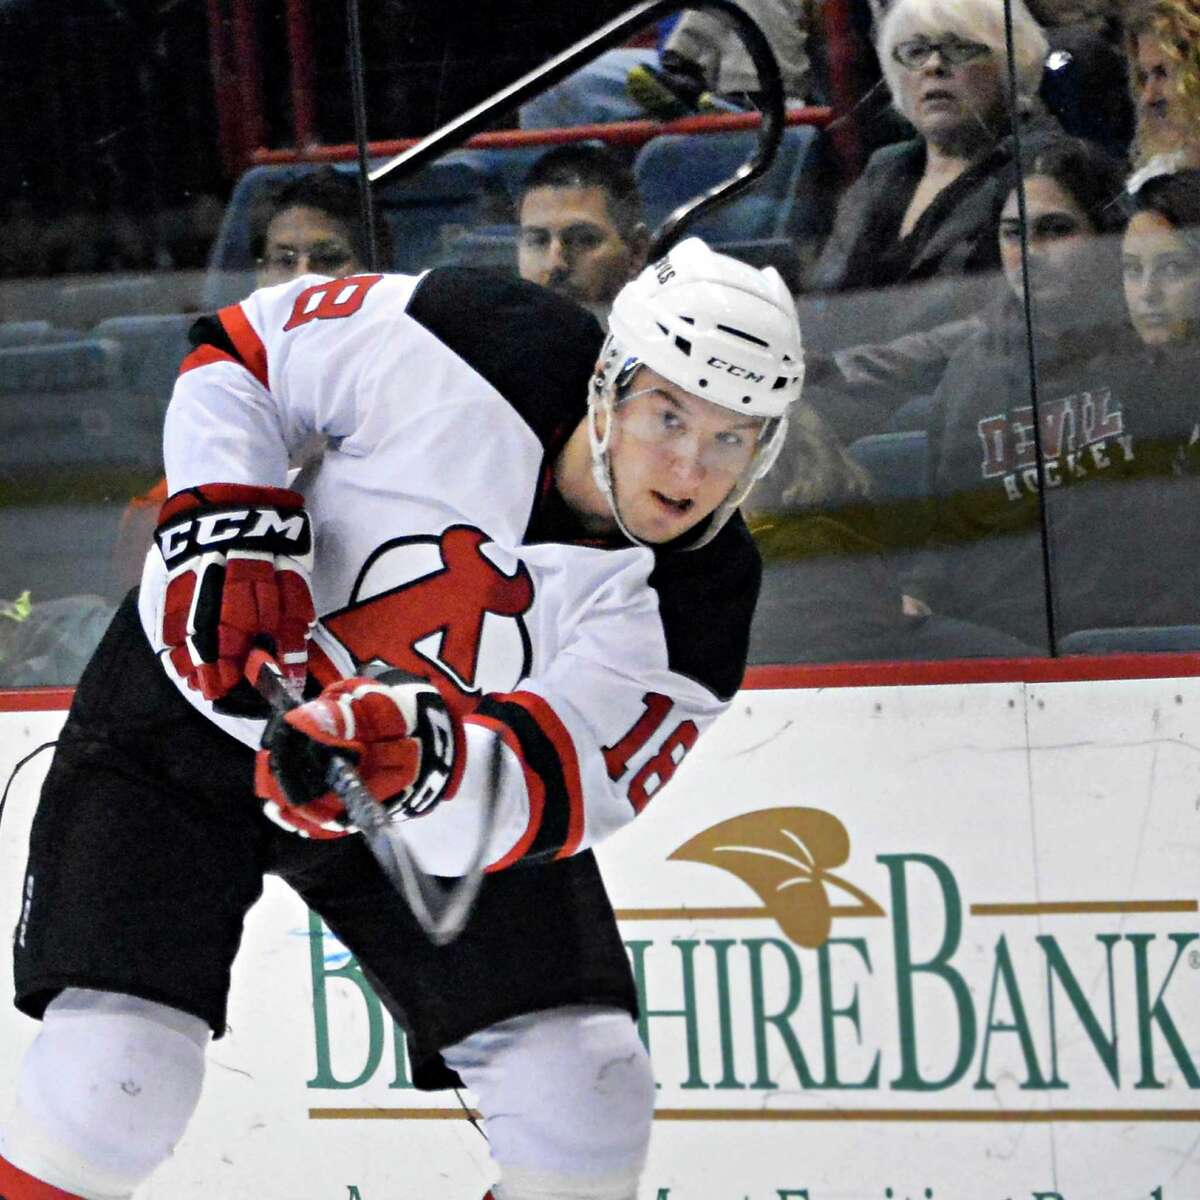 Albany Devils' #18 Stefan Matteau takes a shot on goal during Saturday's game against the Utica Devils at the Times Union Center Nov. 29, 2014 in Albany, NY. (John Carl D'Annibale / Times Union)